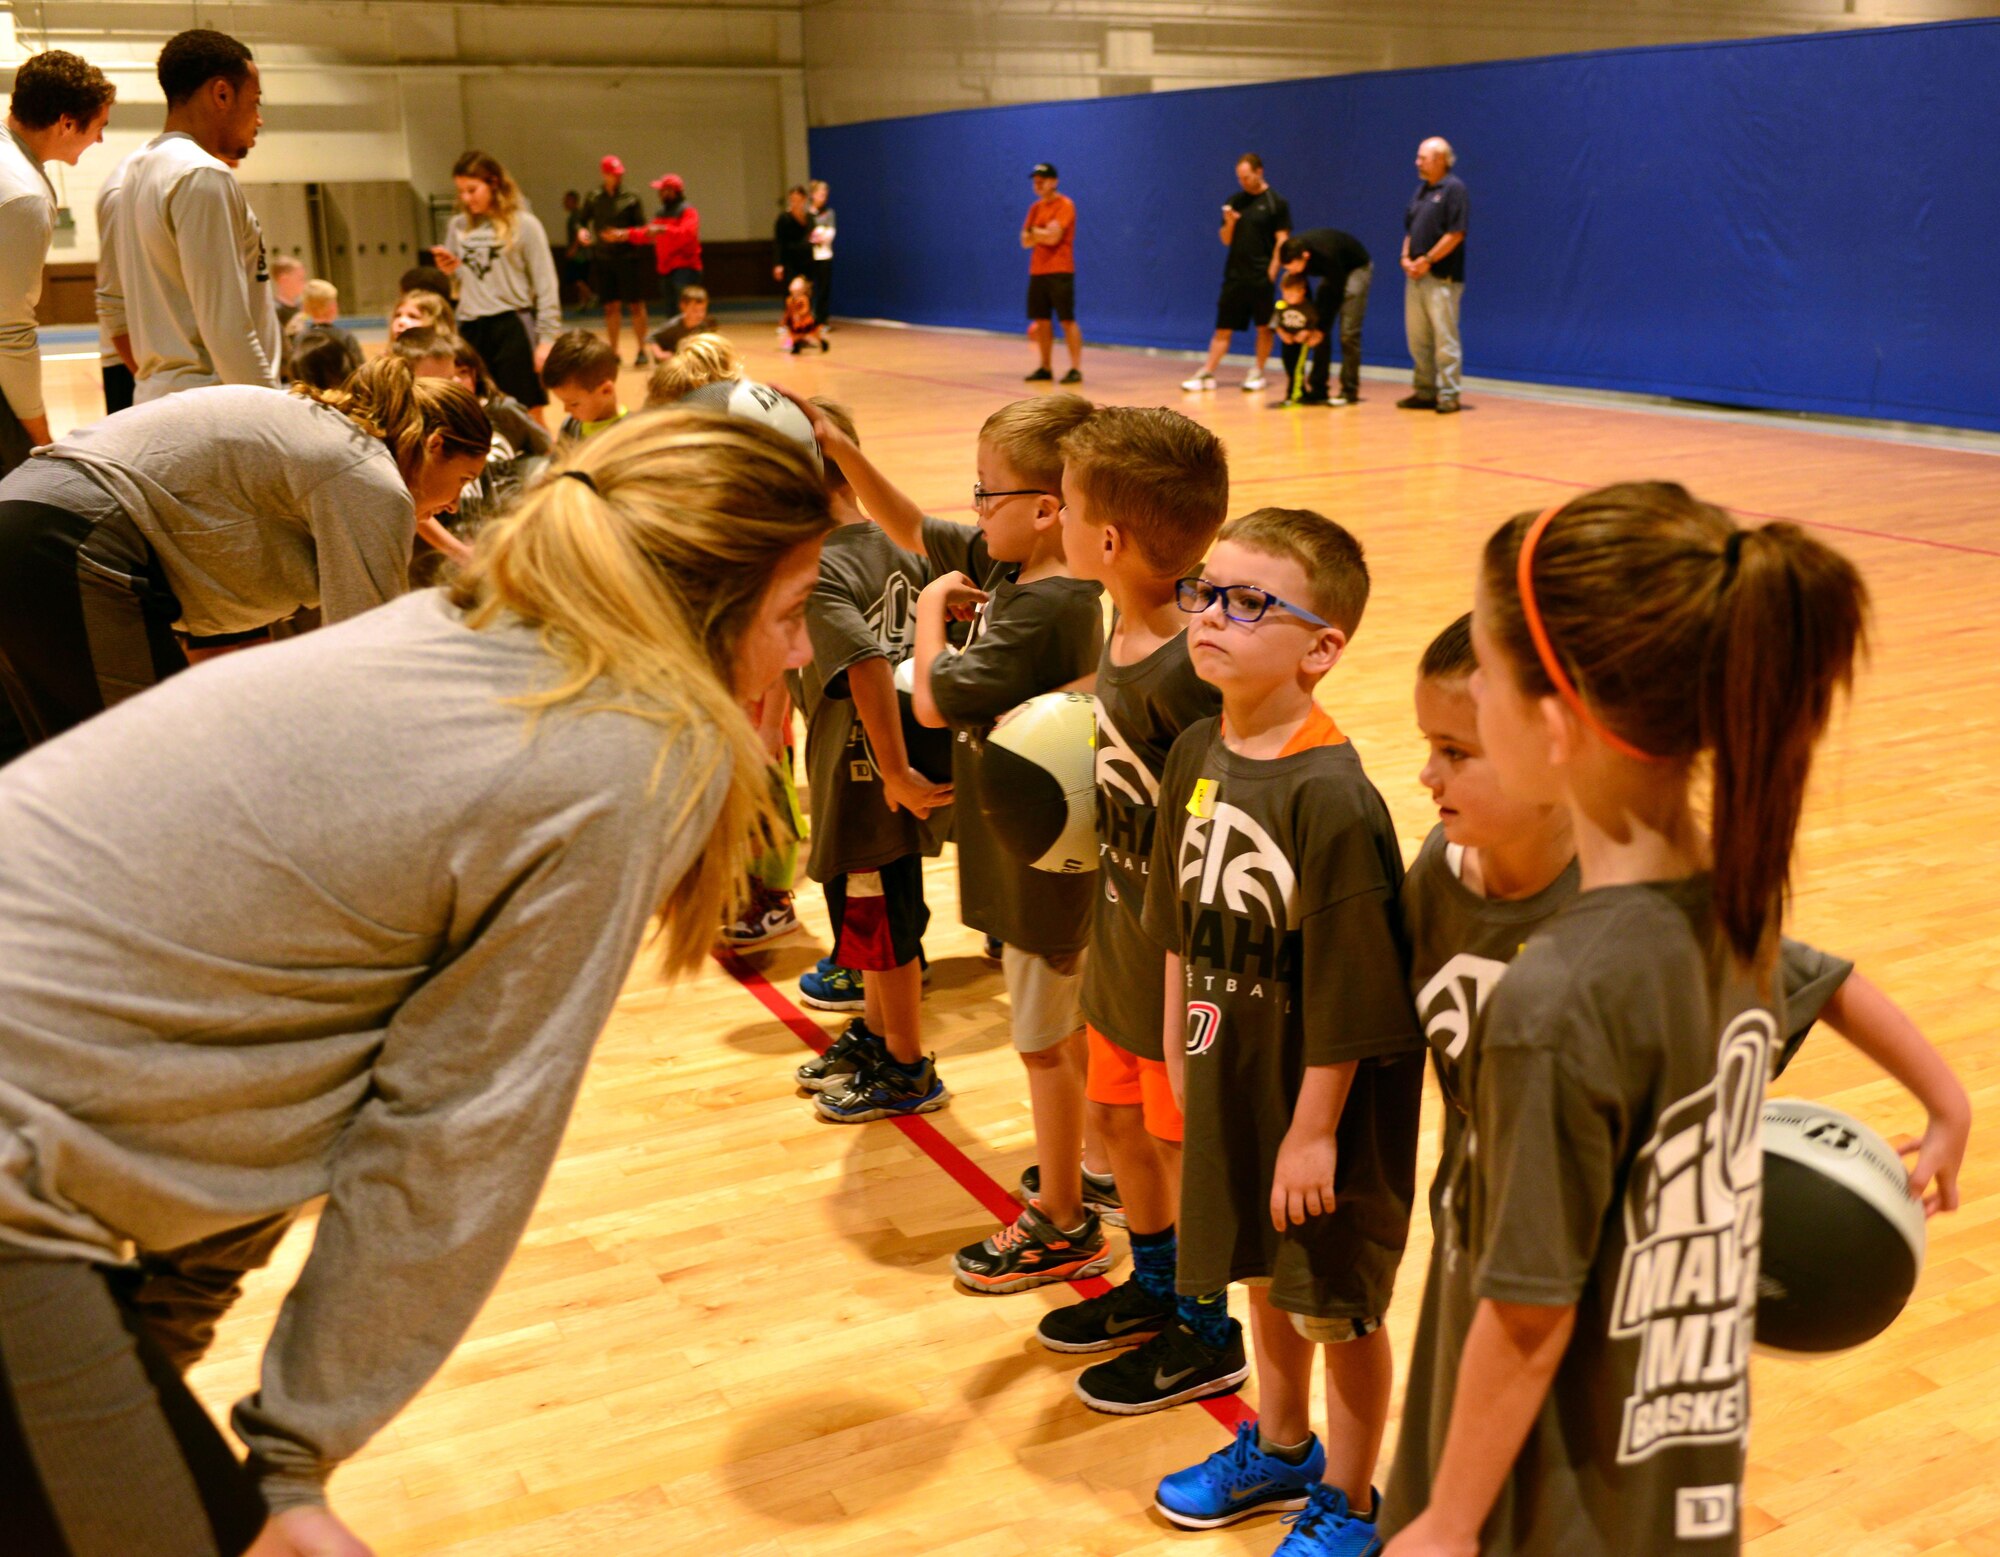 Ellie Brecht, University of Nebraska Omaha sophomore, motivates Team Offutt children to give it their all Oct. 15, 2016 at the Offutt Field House.  The UNO Mavericks’ men’s and women’s basketball teams provided a free basketball clinic to more than 100 military-affiliated children. Nebraska Governor Pete Ricketts spoke to the campers and passed along thanks from the citizens of Nebraska to the members of Team Offutt.